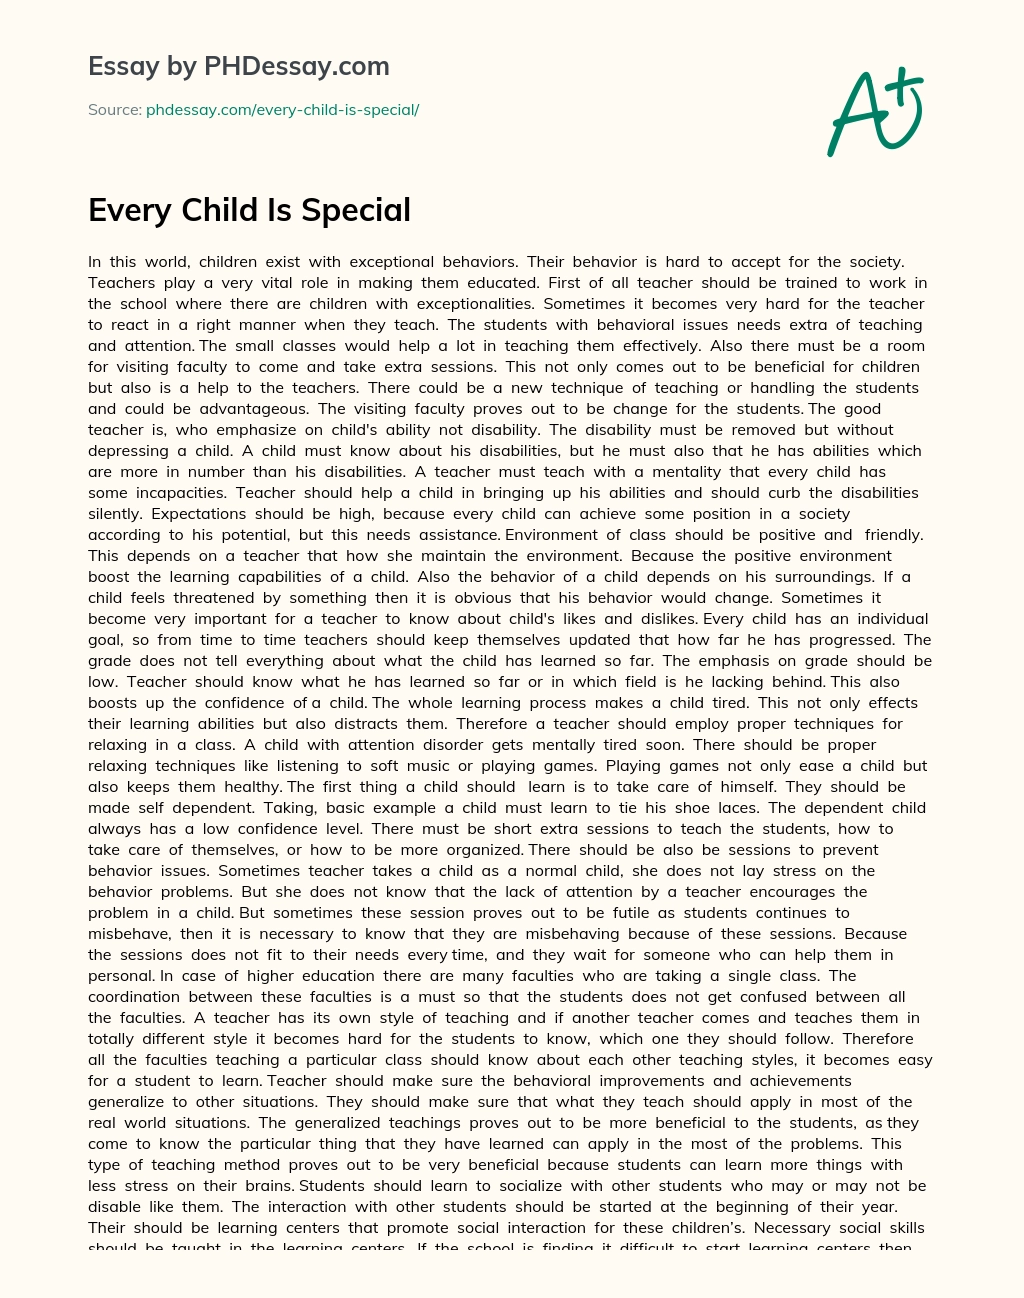 Every  Child  Is  Special essay